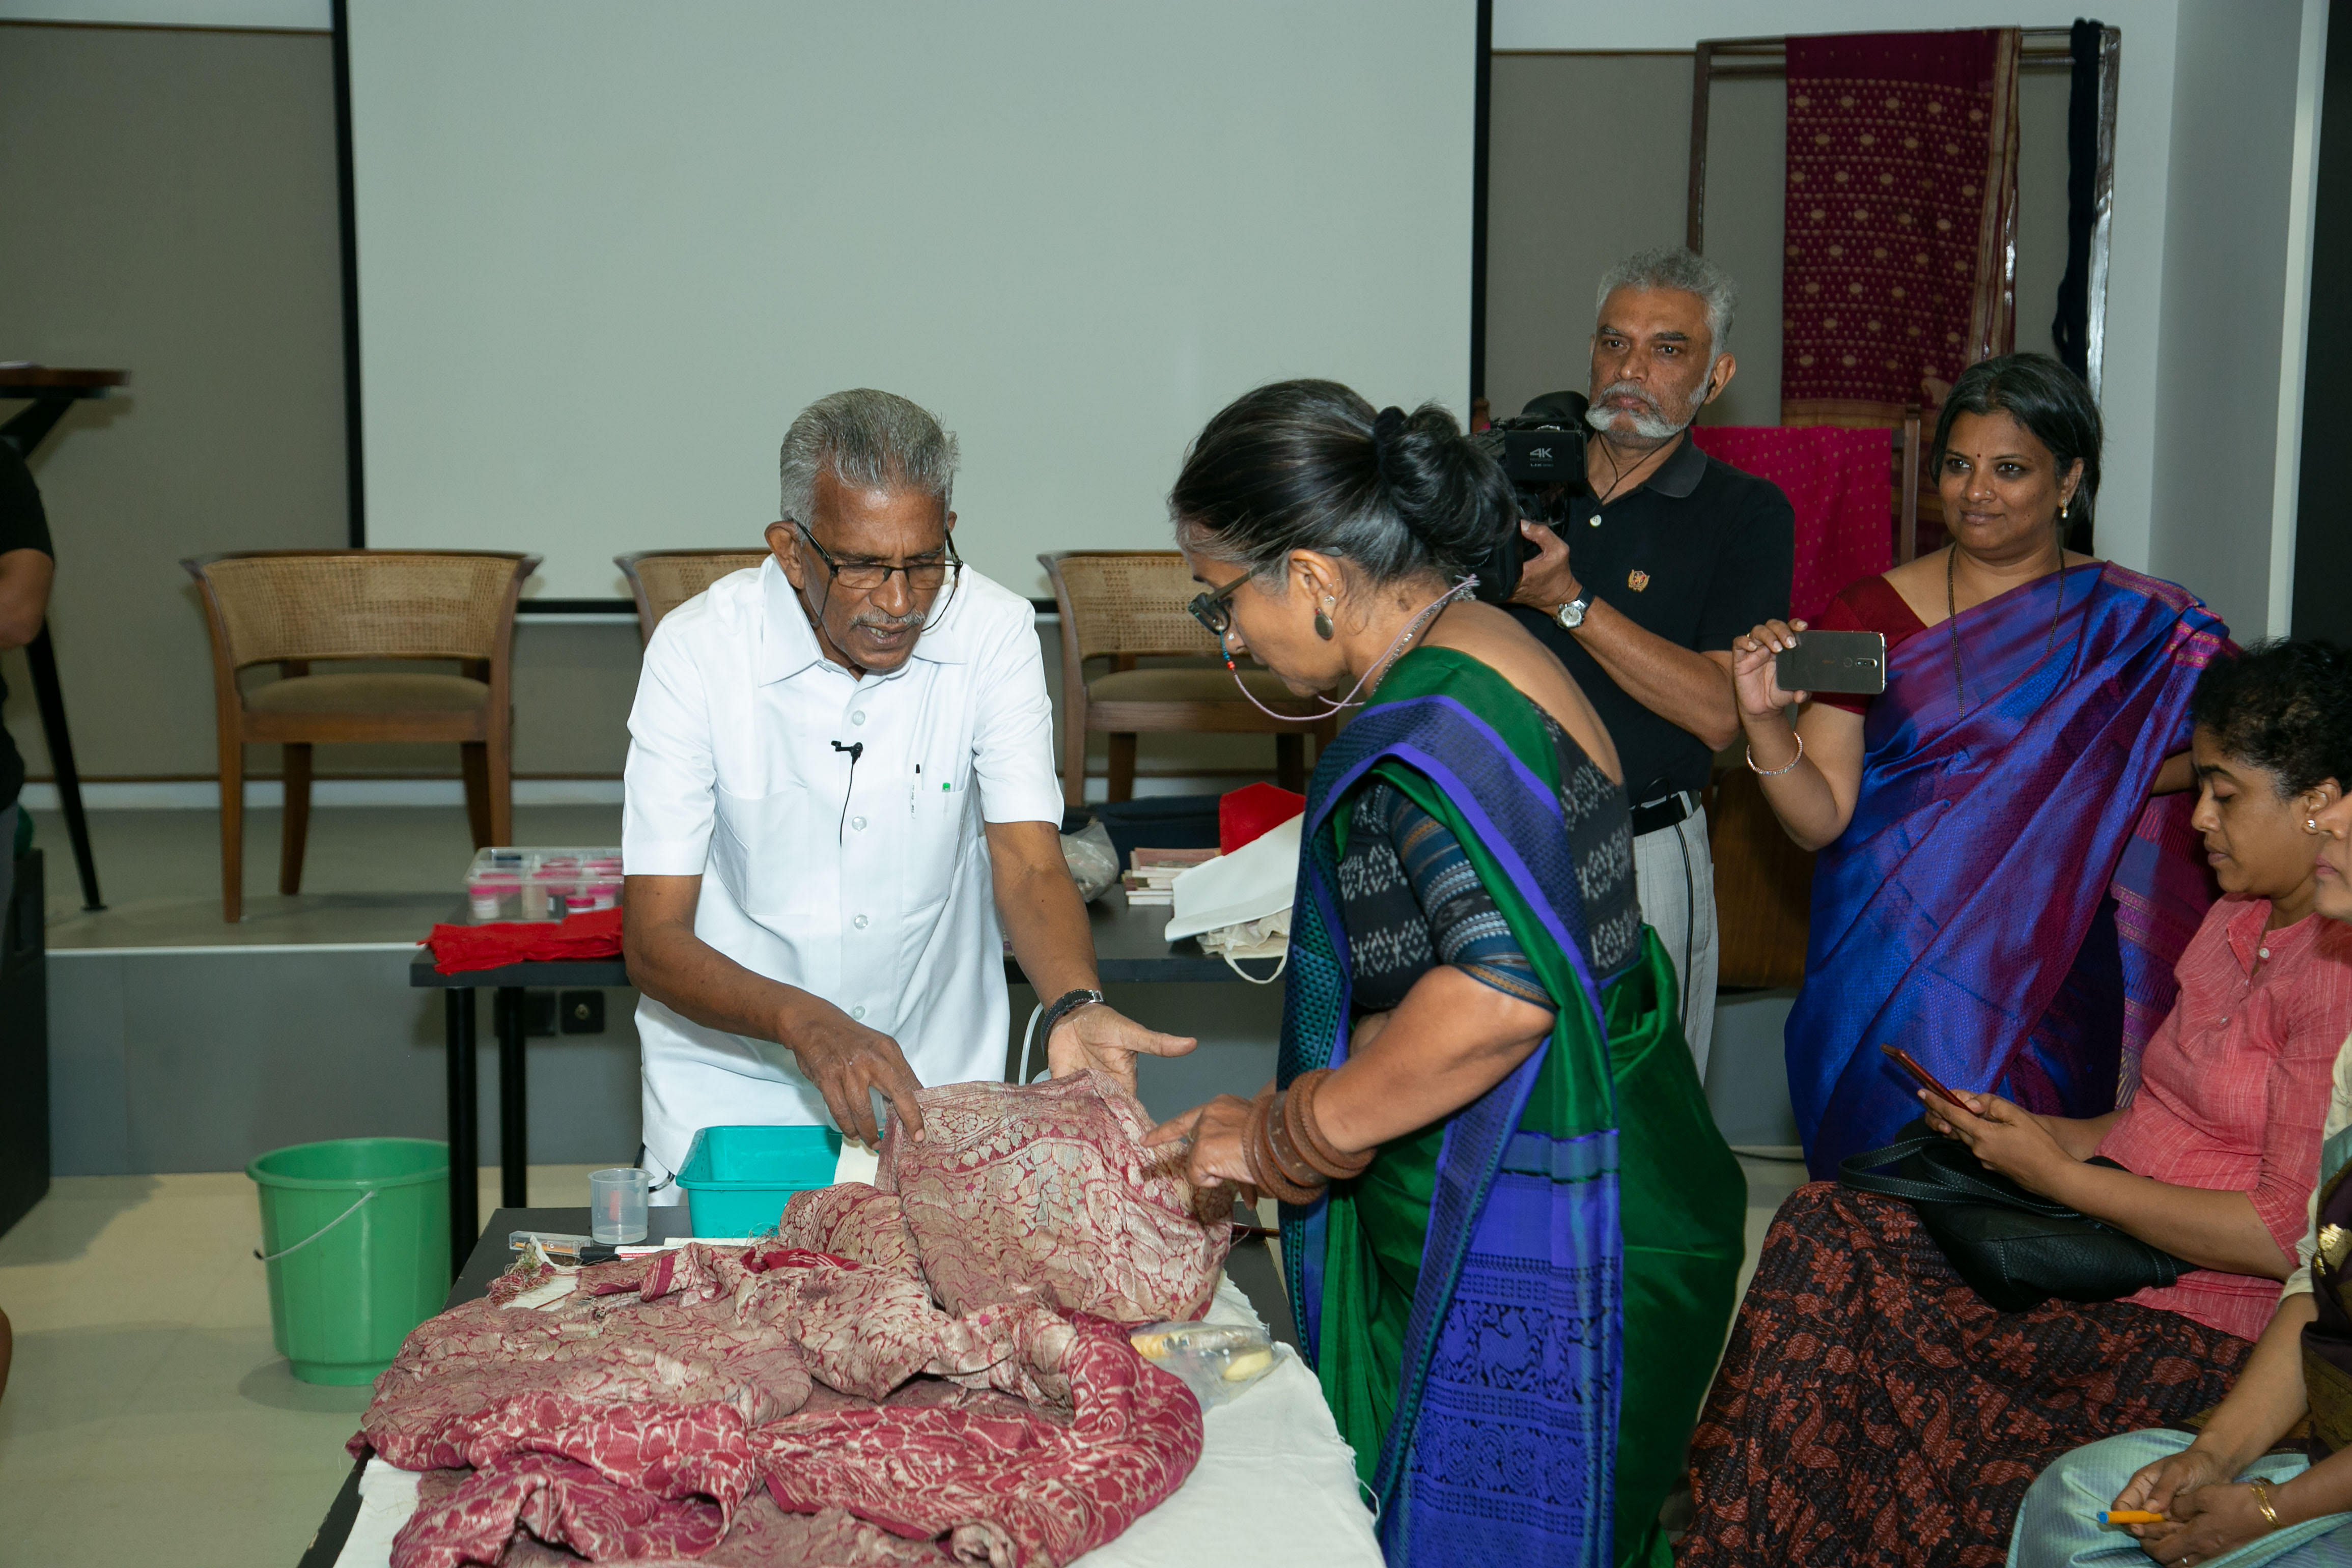 Dr Jeyraj (in white) shared tips on how to conserve handlooms at ‘A Textile Conservation Workshop’.